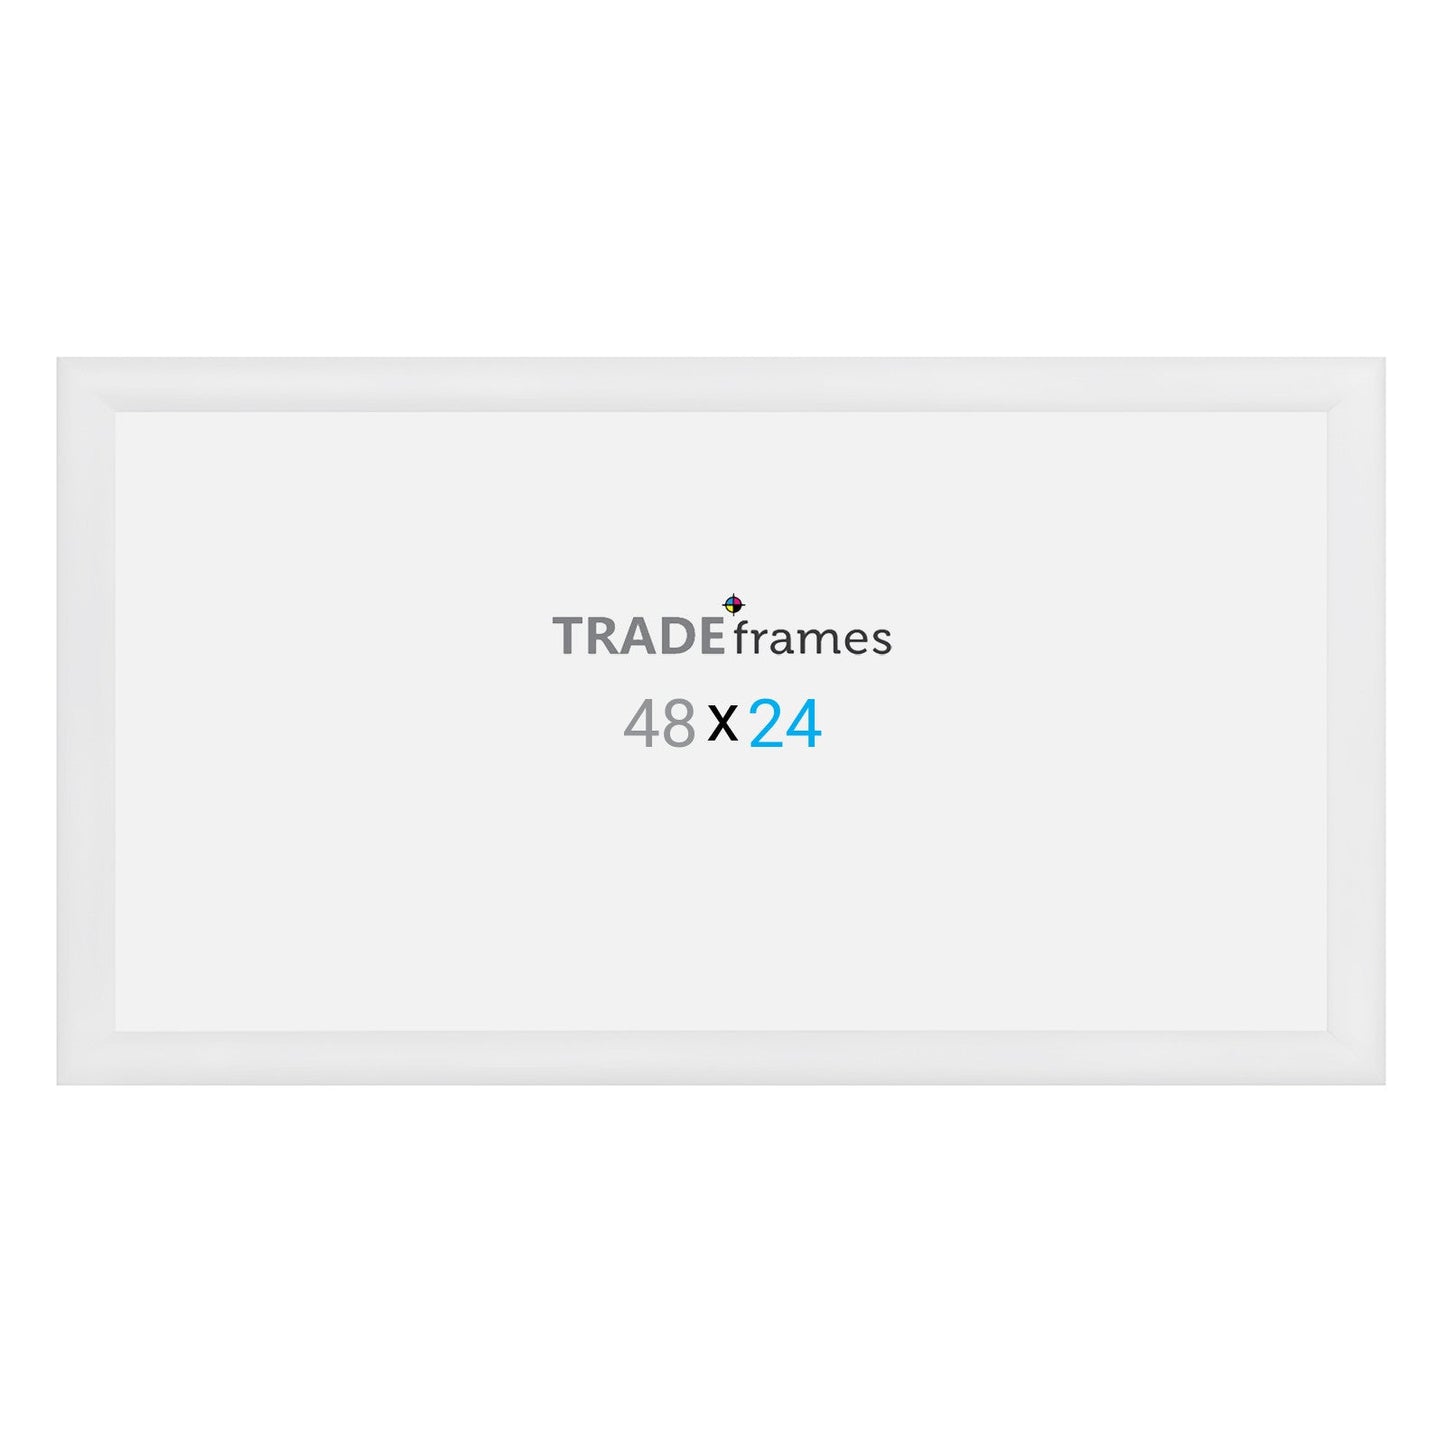 24x48 TRADEframe White Snap Frame 24x48 - 1.2 inch profile - Snap Frames Direct